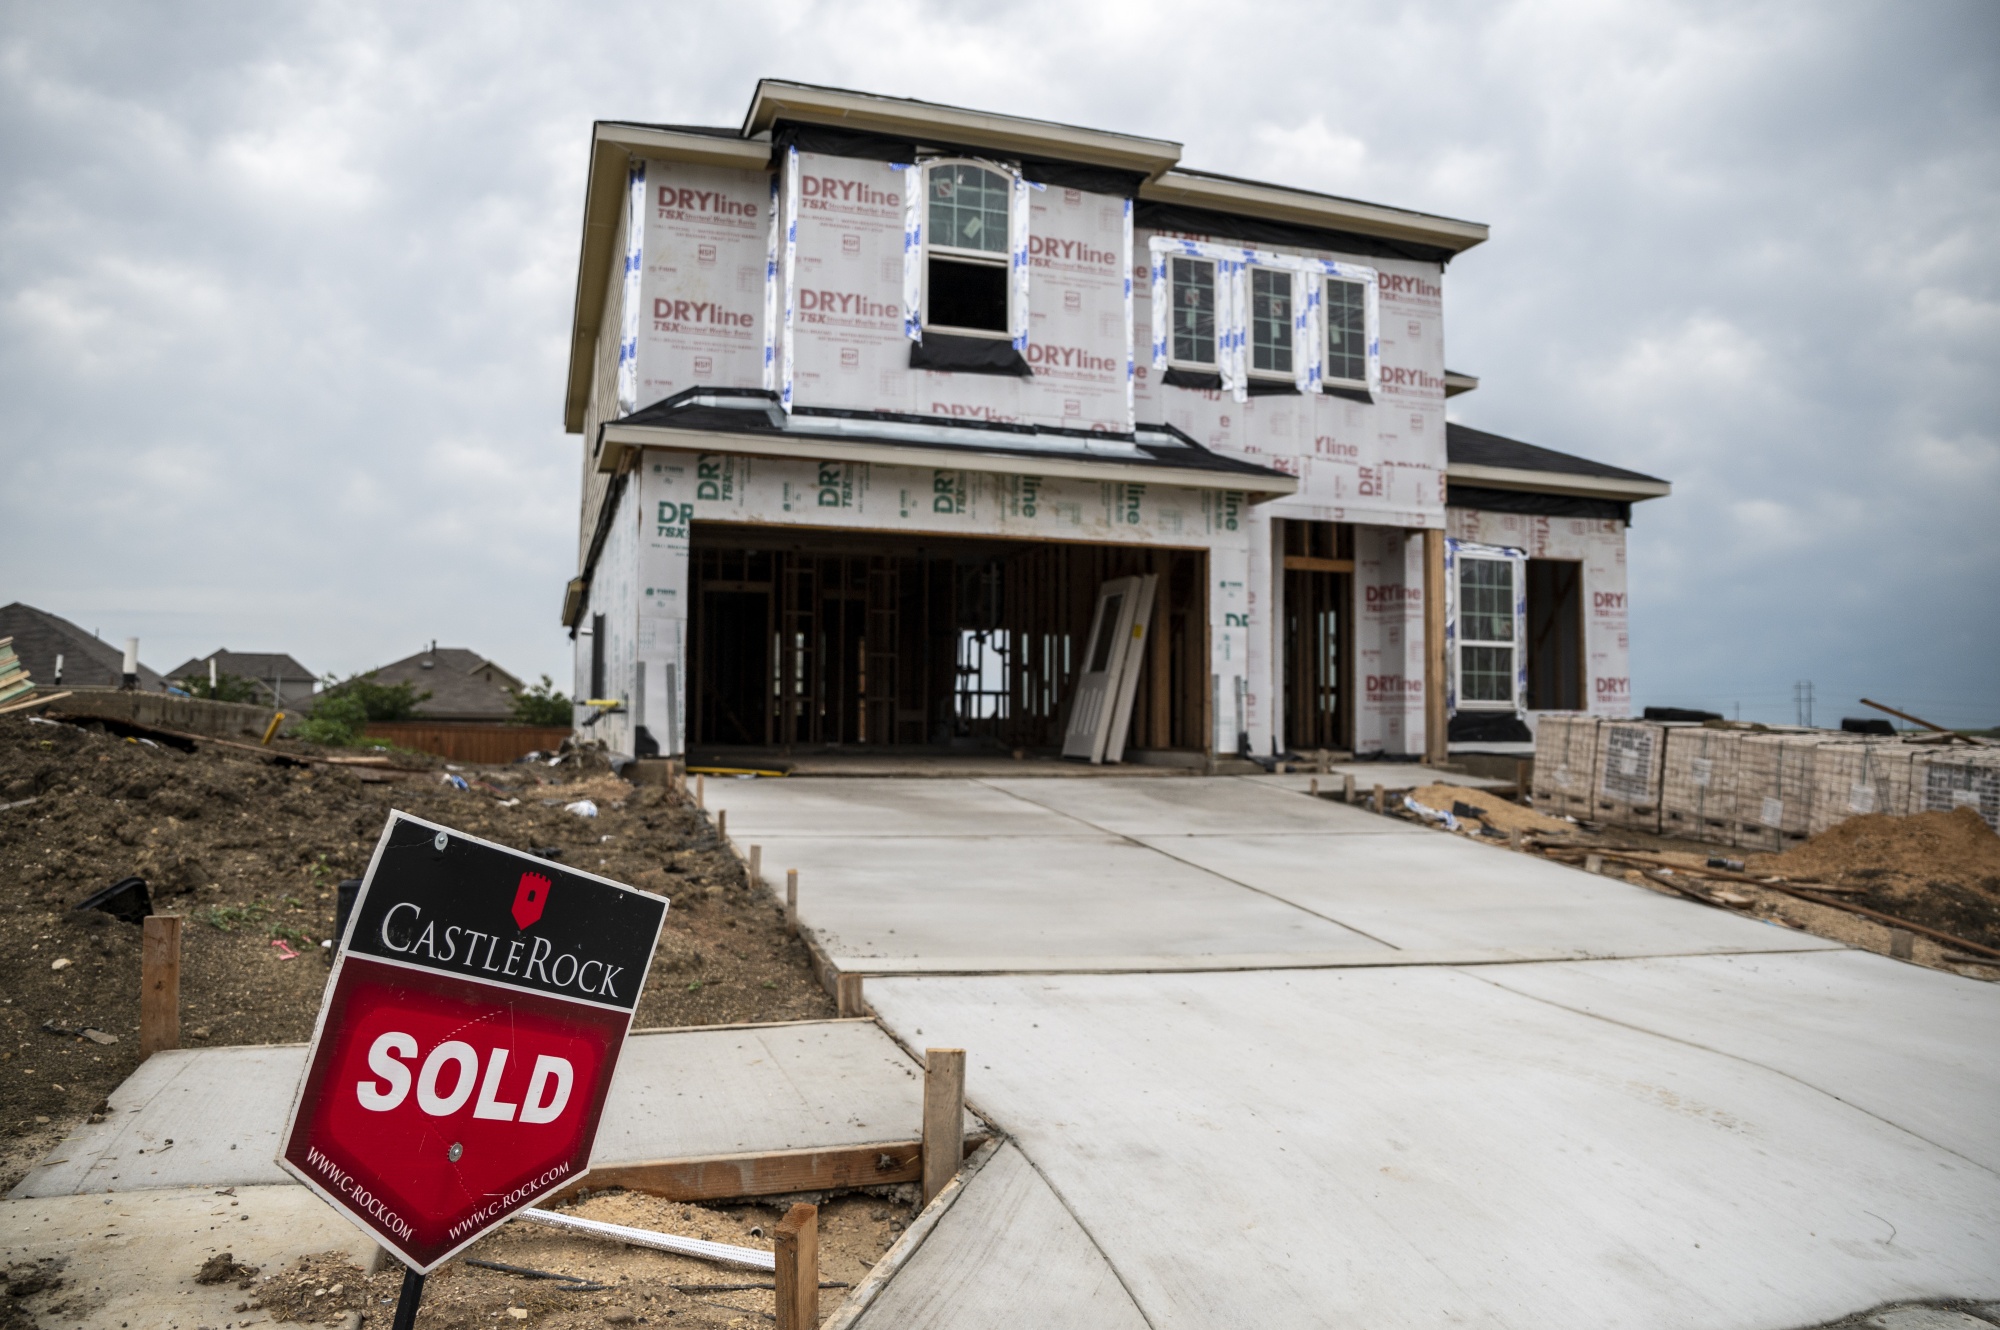 Shopping for a Home Gets Harder as Builders Restrict Their Orders